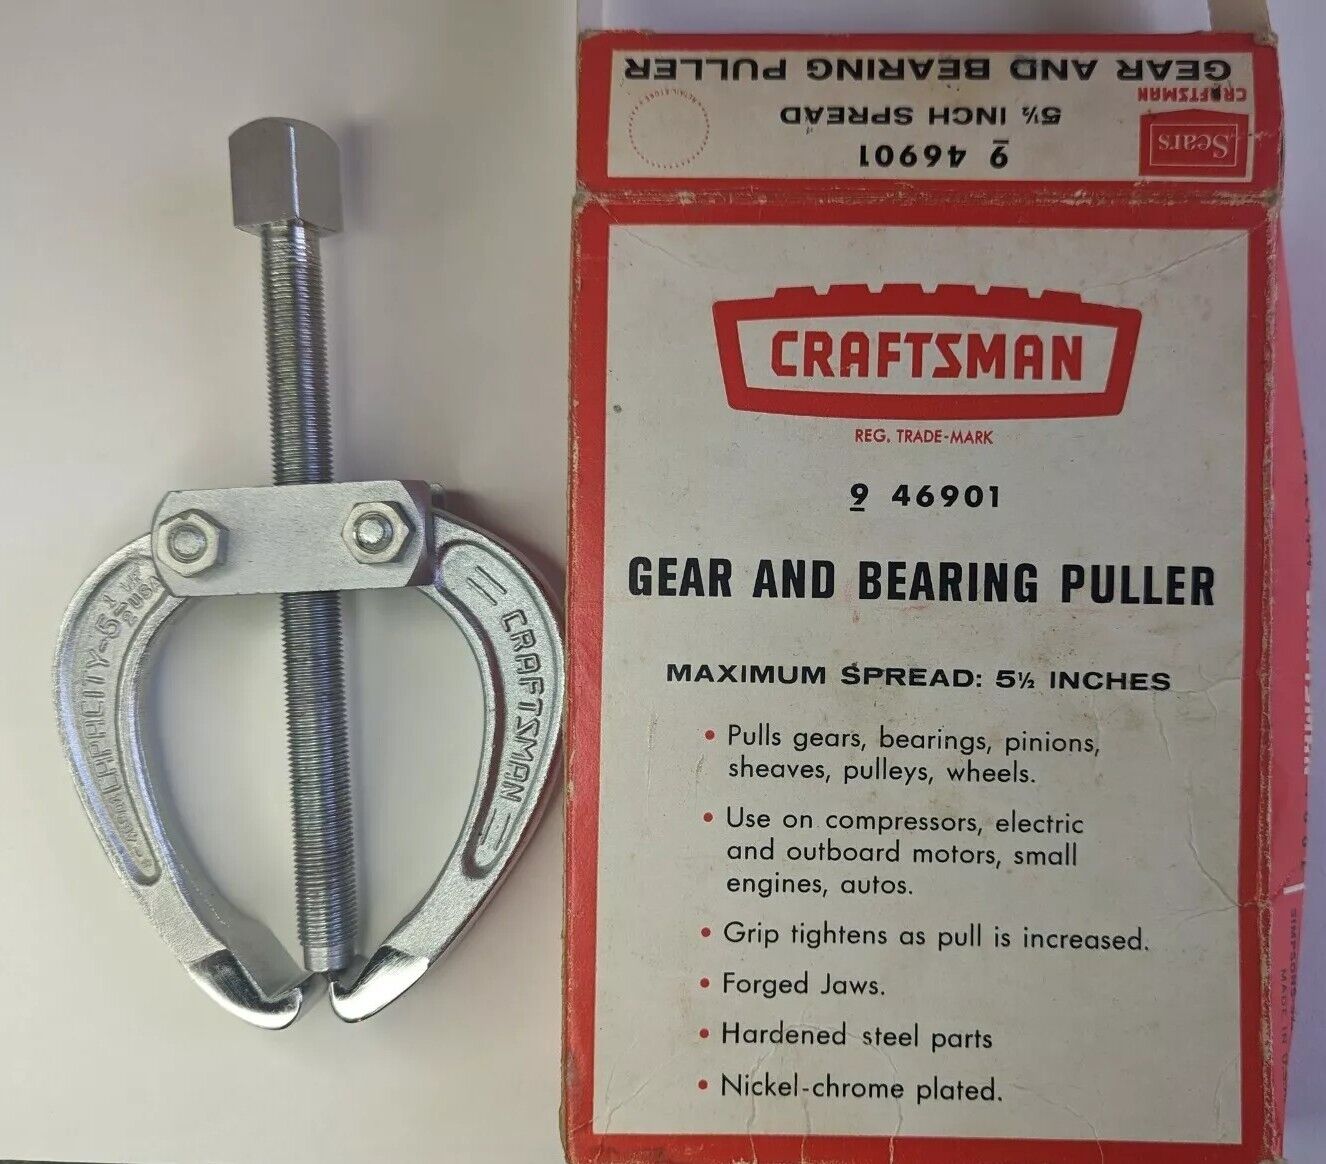 Vintage Sears Craftsman 9-46901 Two Jaw Gear And Bearing Puller